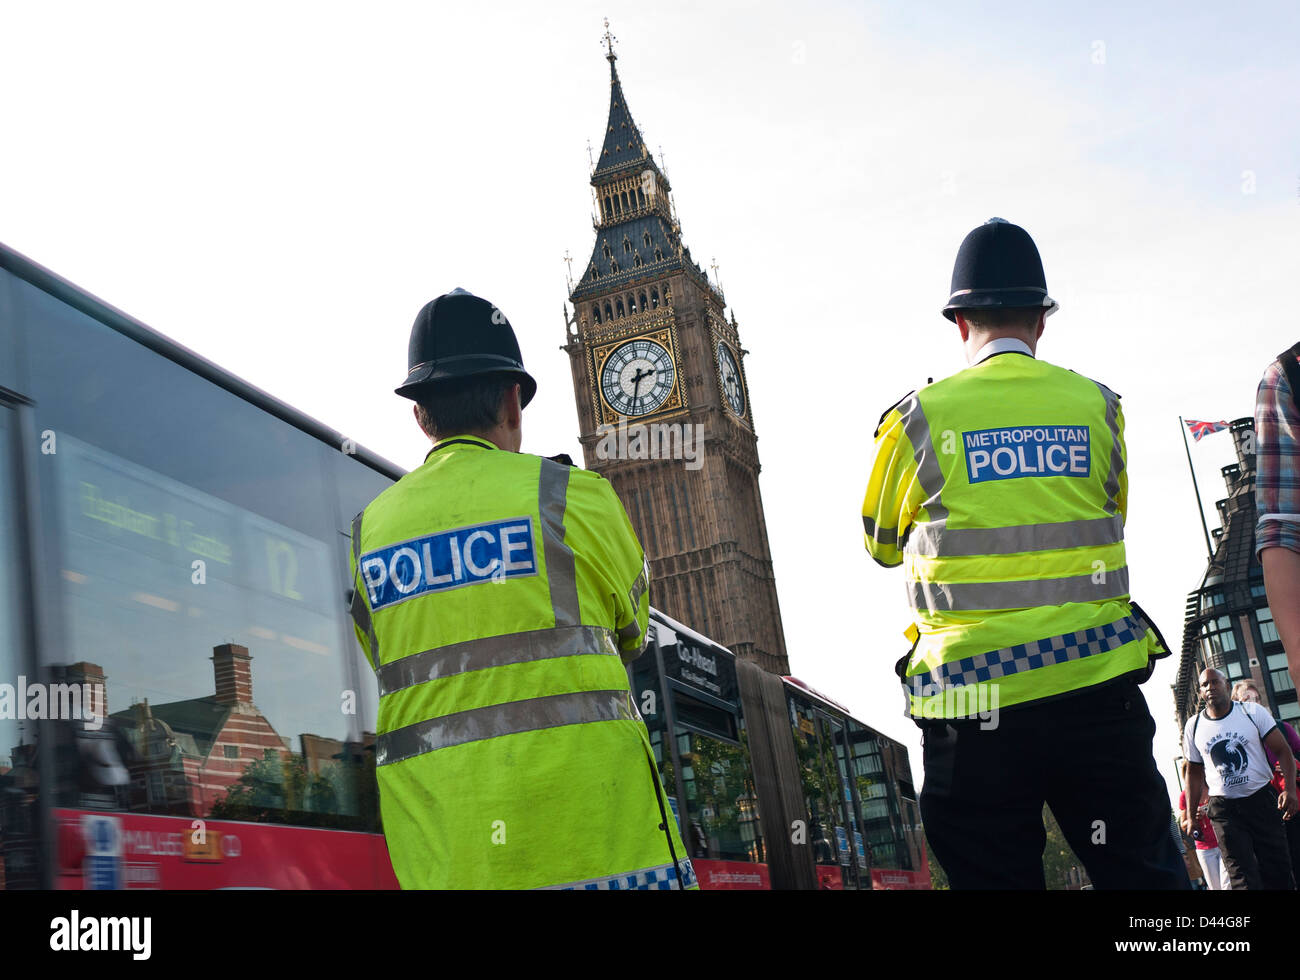 London Police officers wearing helmets & high visibility jackets, Westminster street duty back view. Westminster Bridge Houses of Parliament London UK Stock Photo